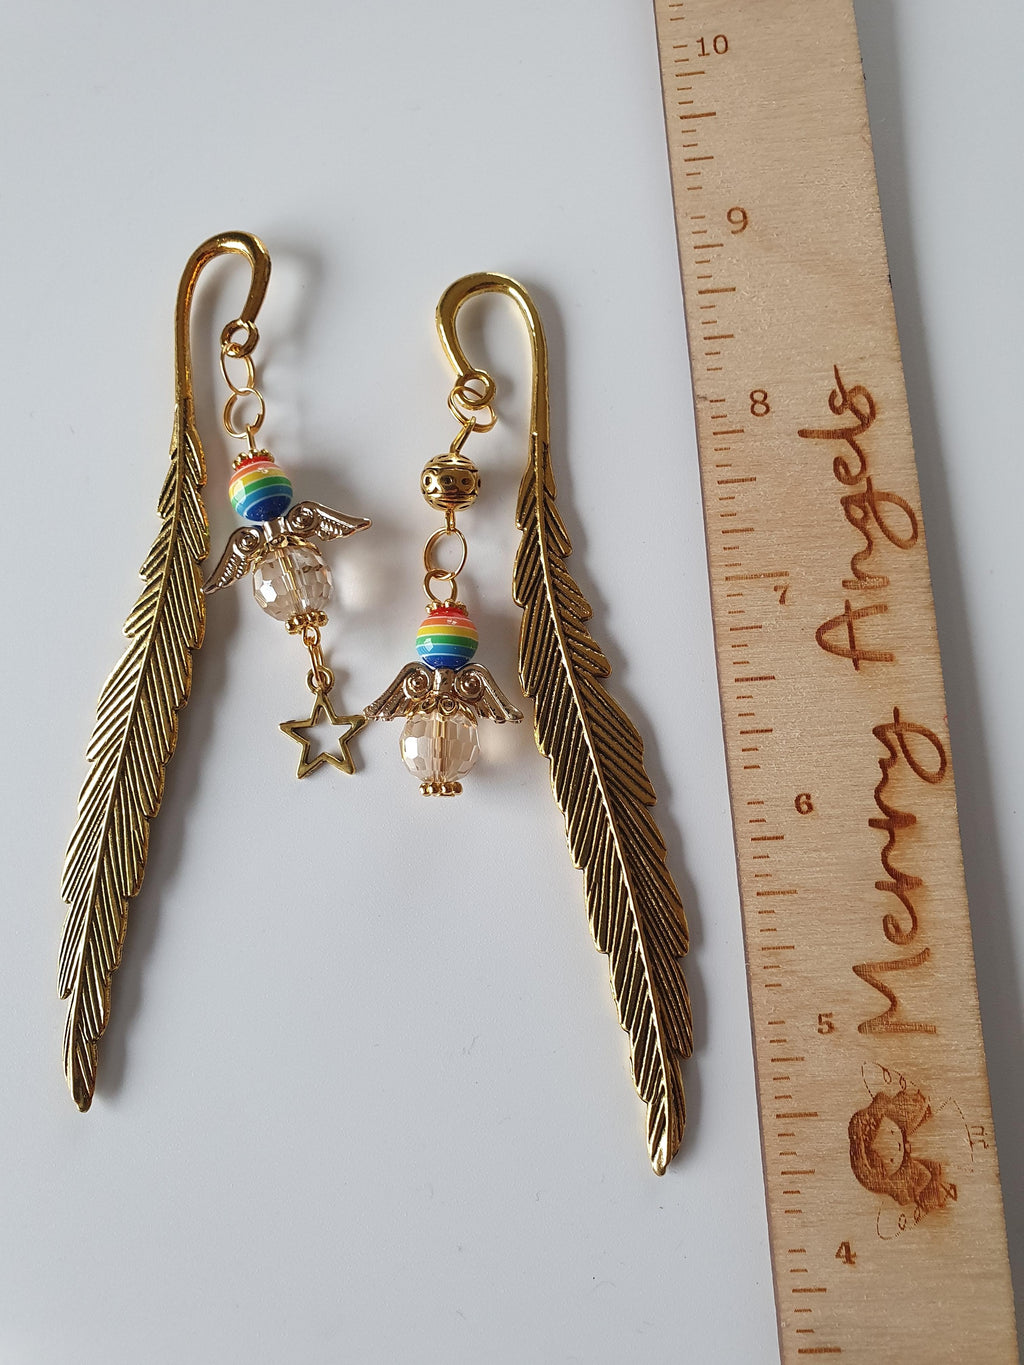 This is a picture of two angel feather bookmarks. Each angel has beautiful rainbow colours on their heads